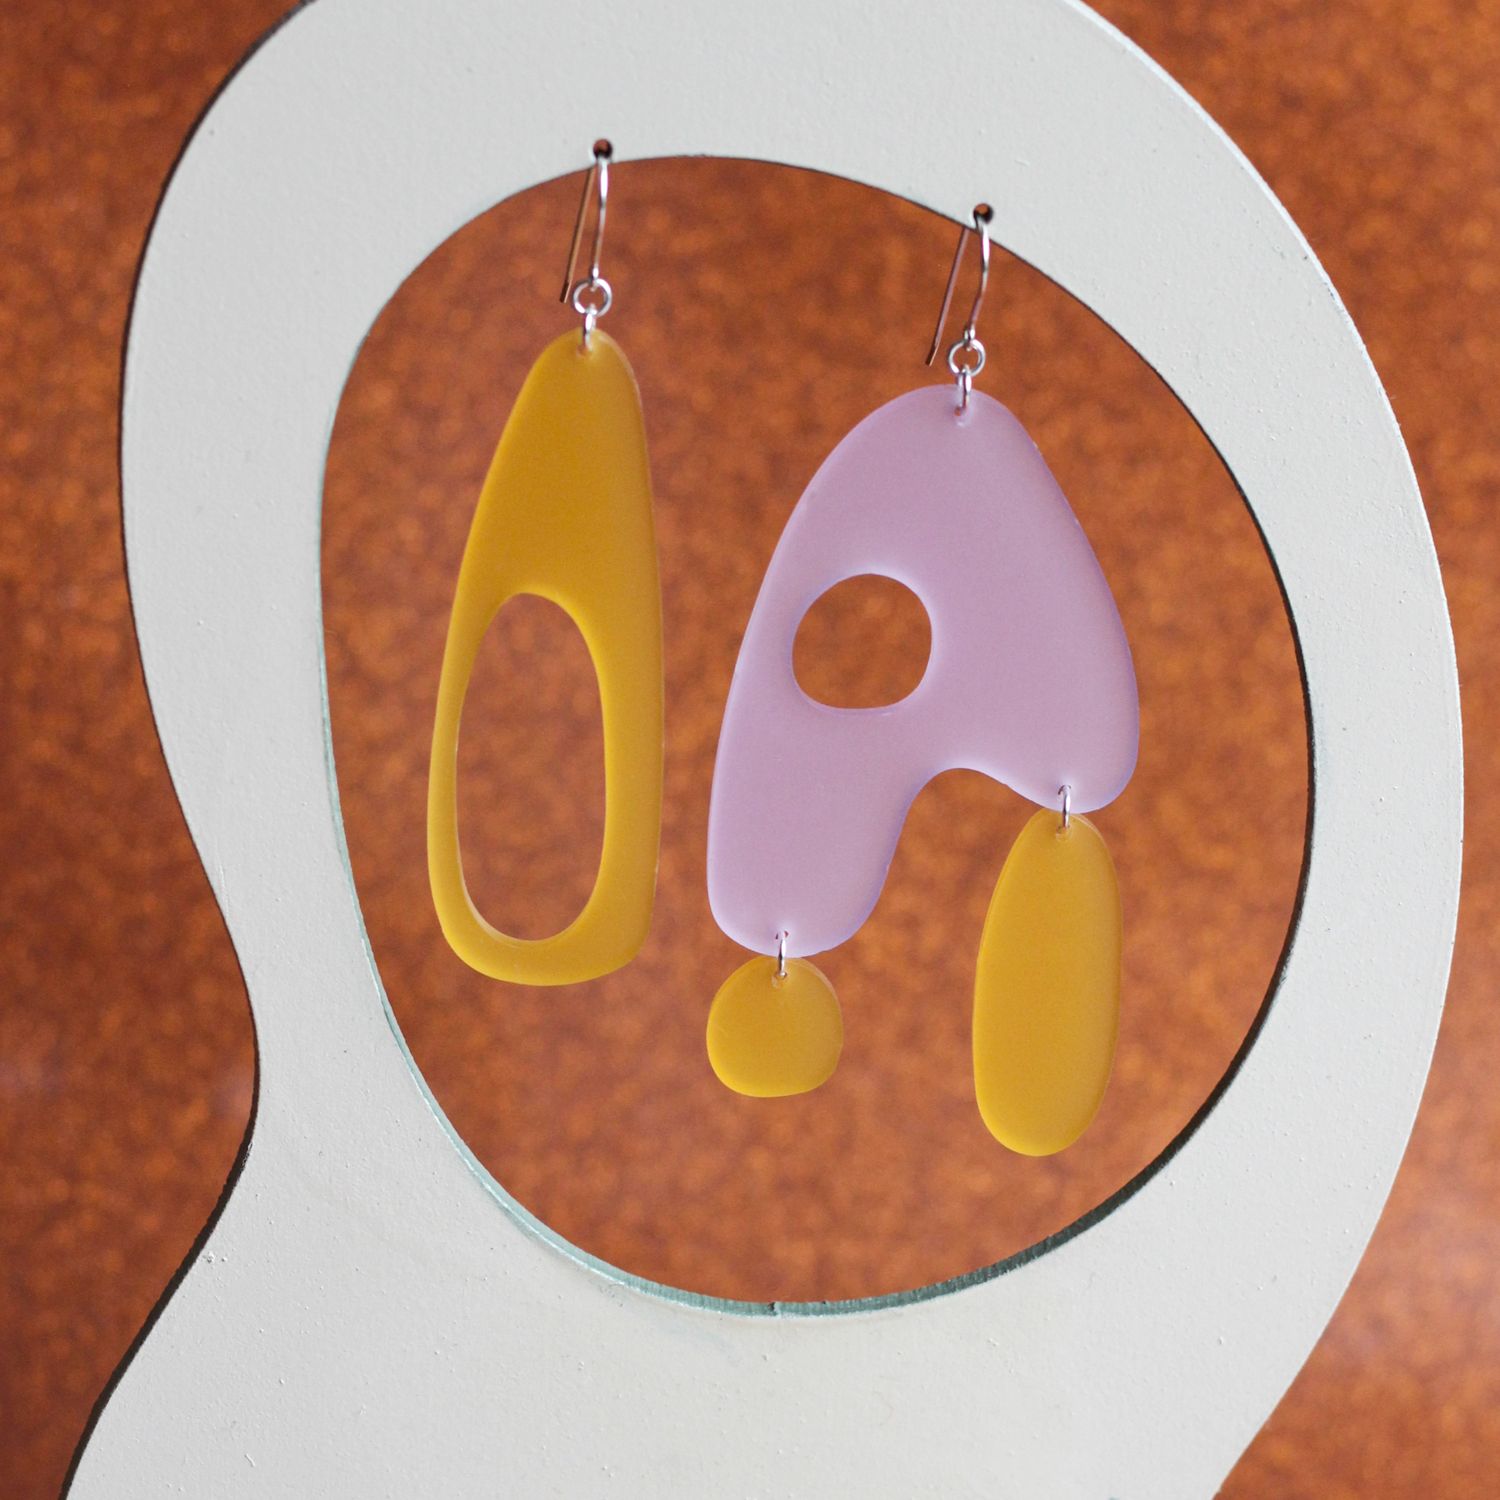 Nicnac: Fraternal Earrings in Lavender and Sun 2 Product Image 2 of 2